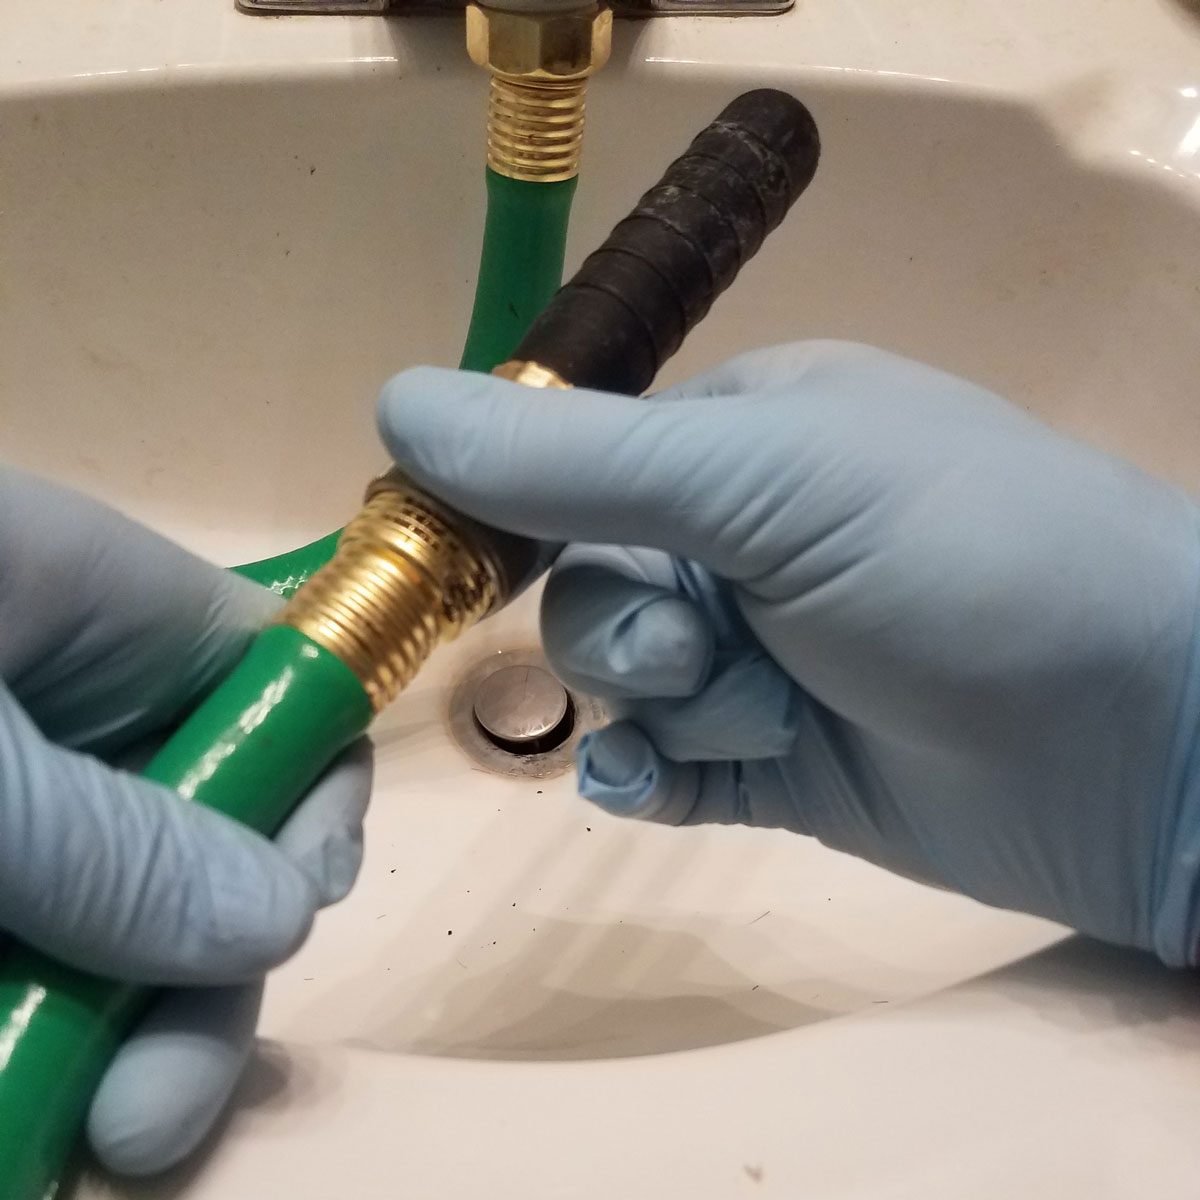 How to Use a Drain Bladder to Blast Any Sink Clog